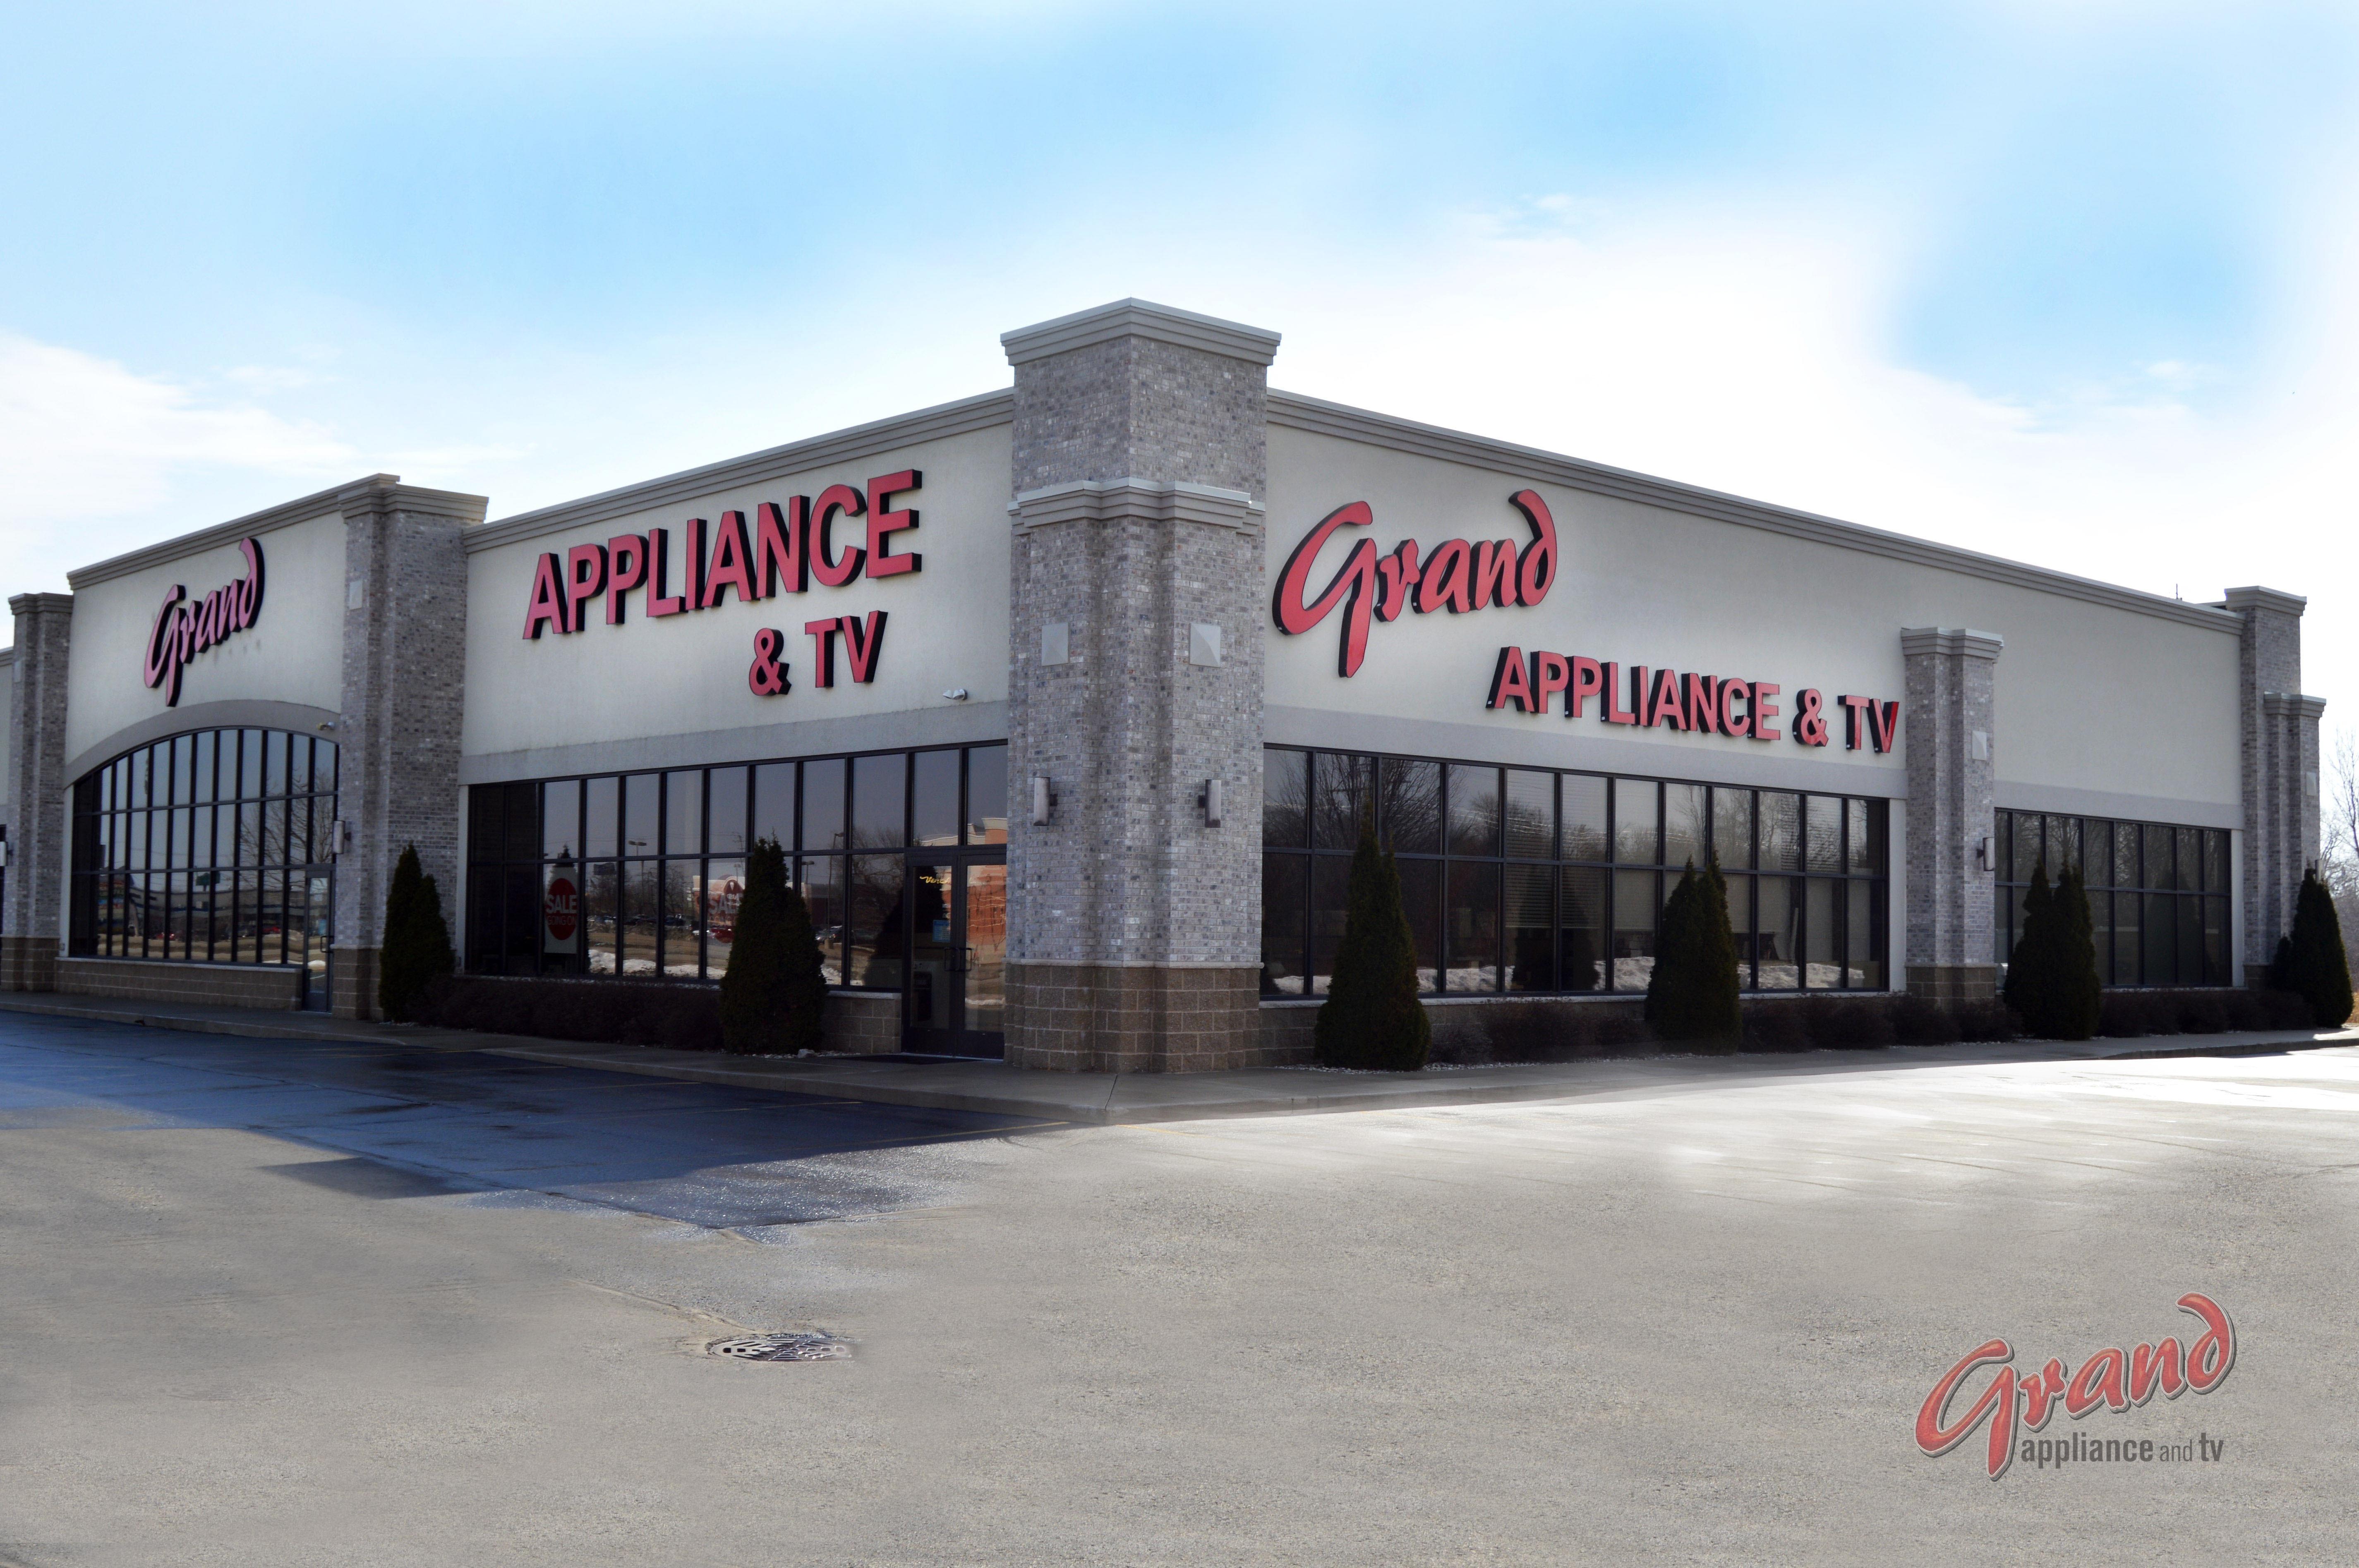 Grand Appliance and TV Coupons near me in Appleton | 8coupons